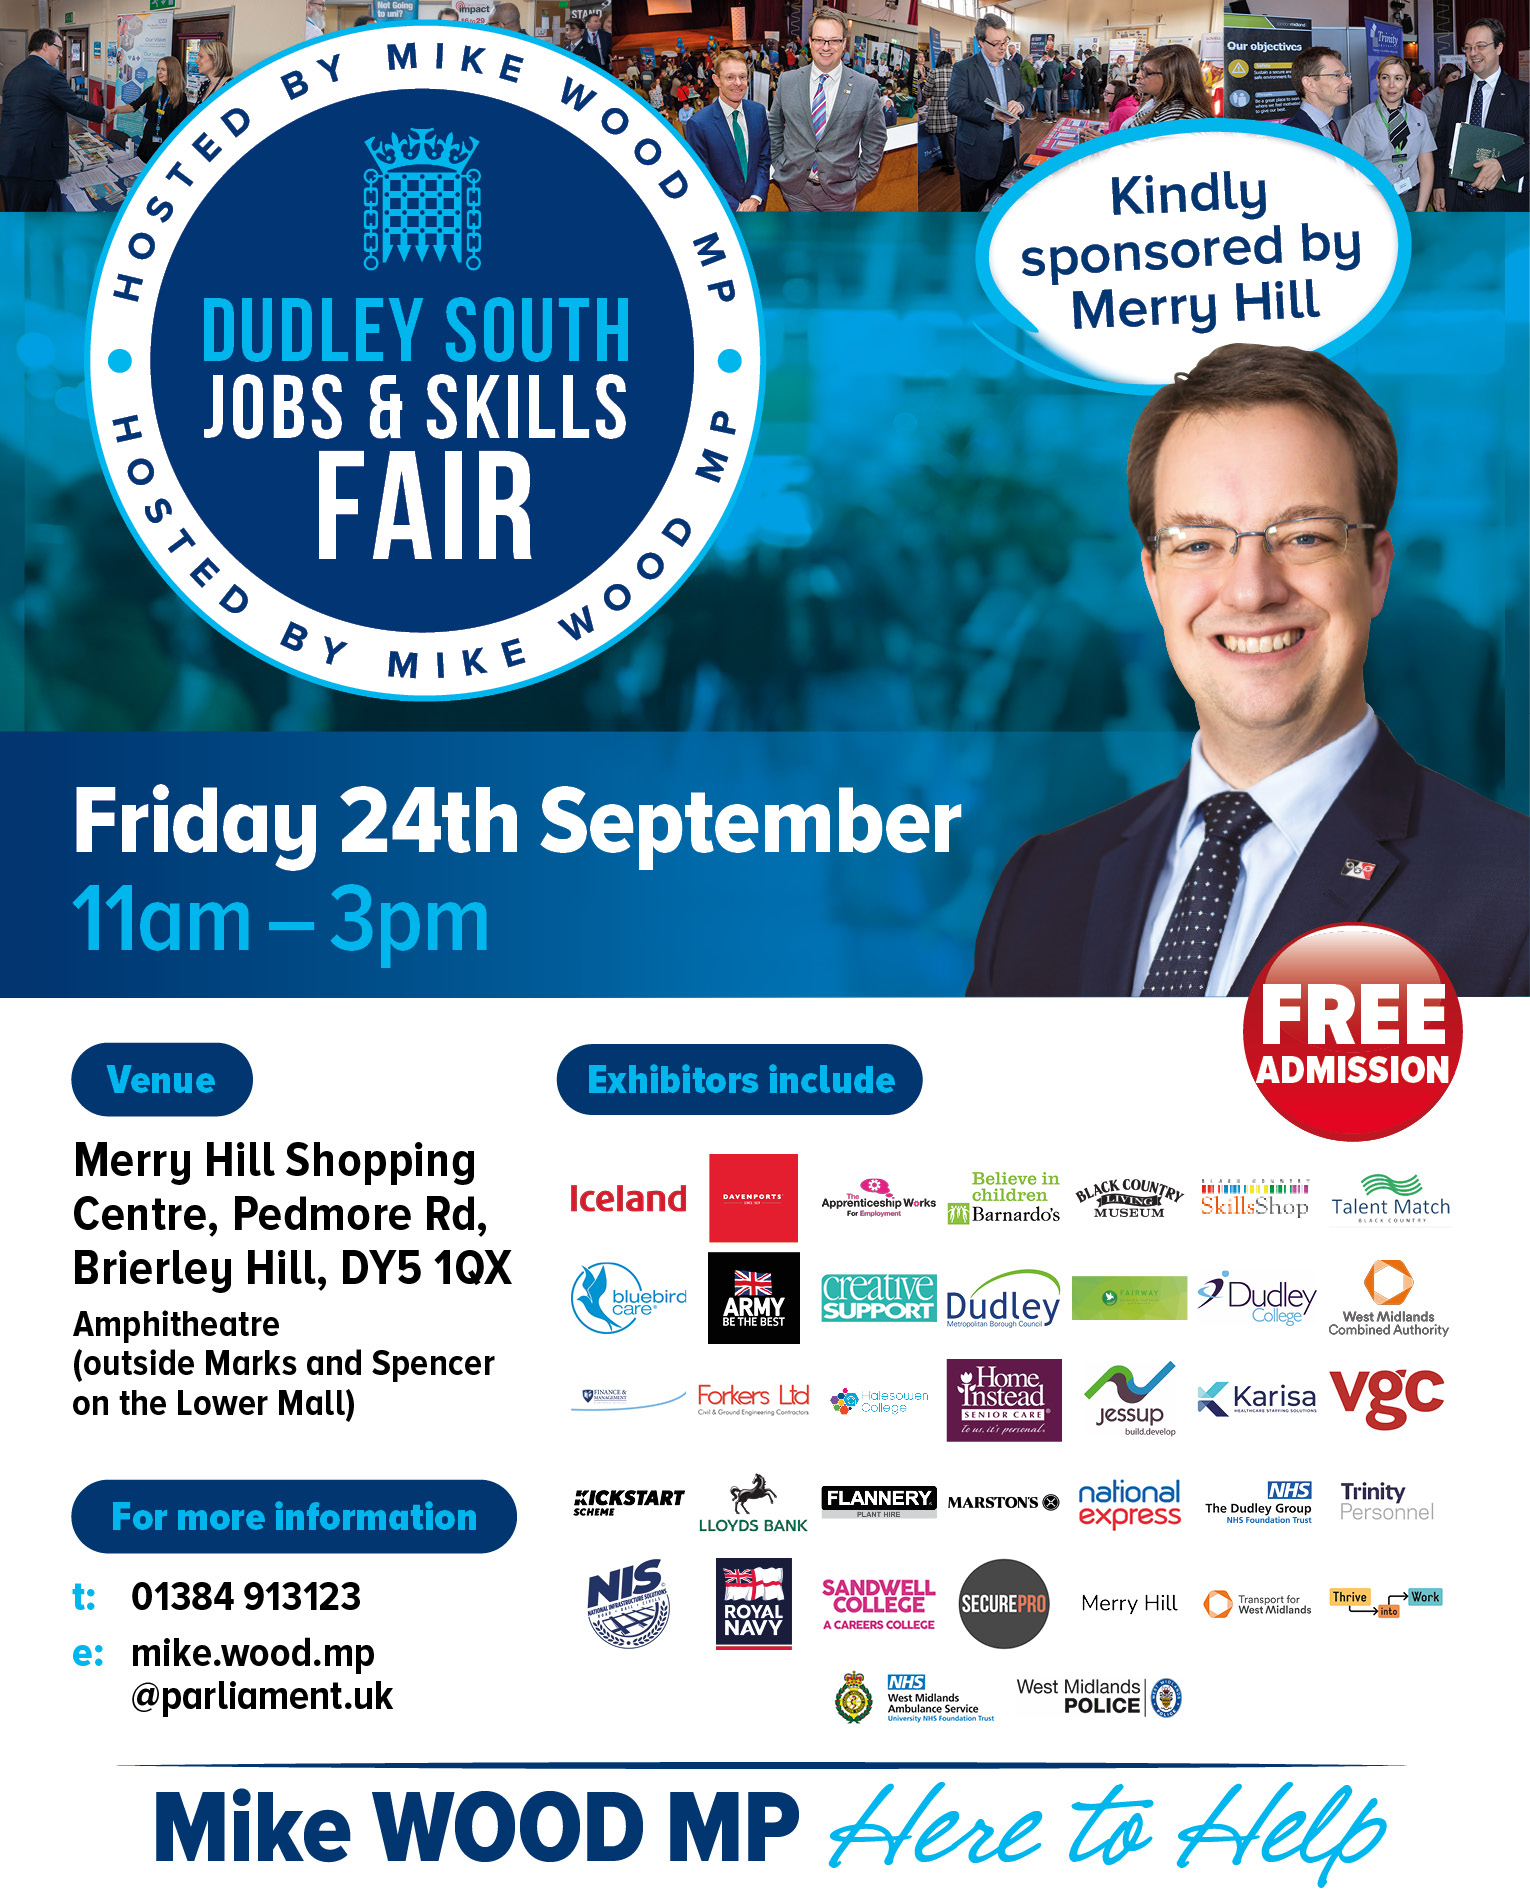 Dudley South Jobs and Skills Fair - Friday 24th September 2021